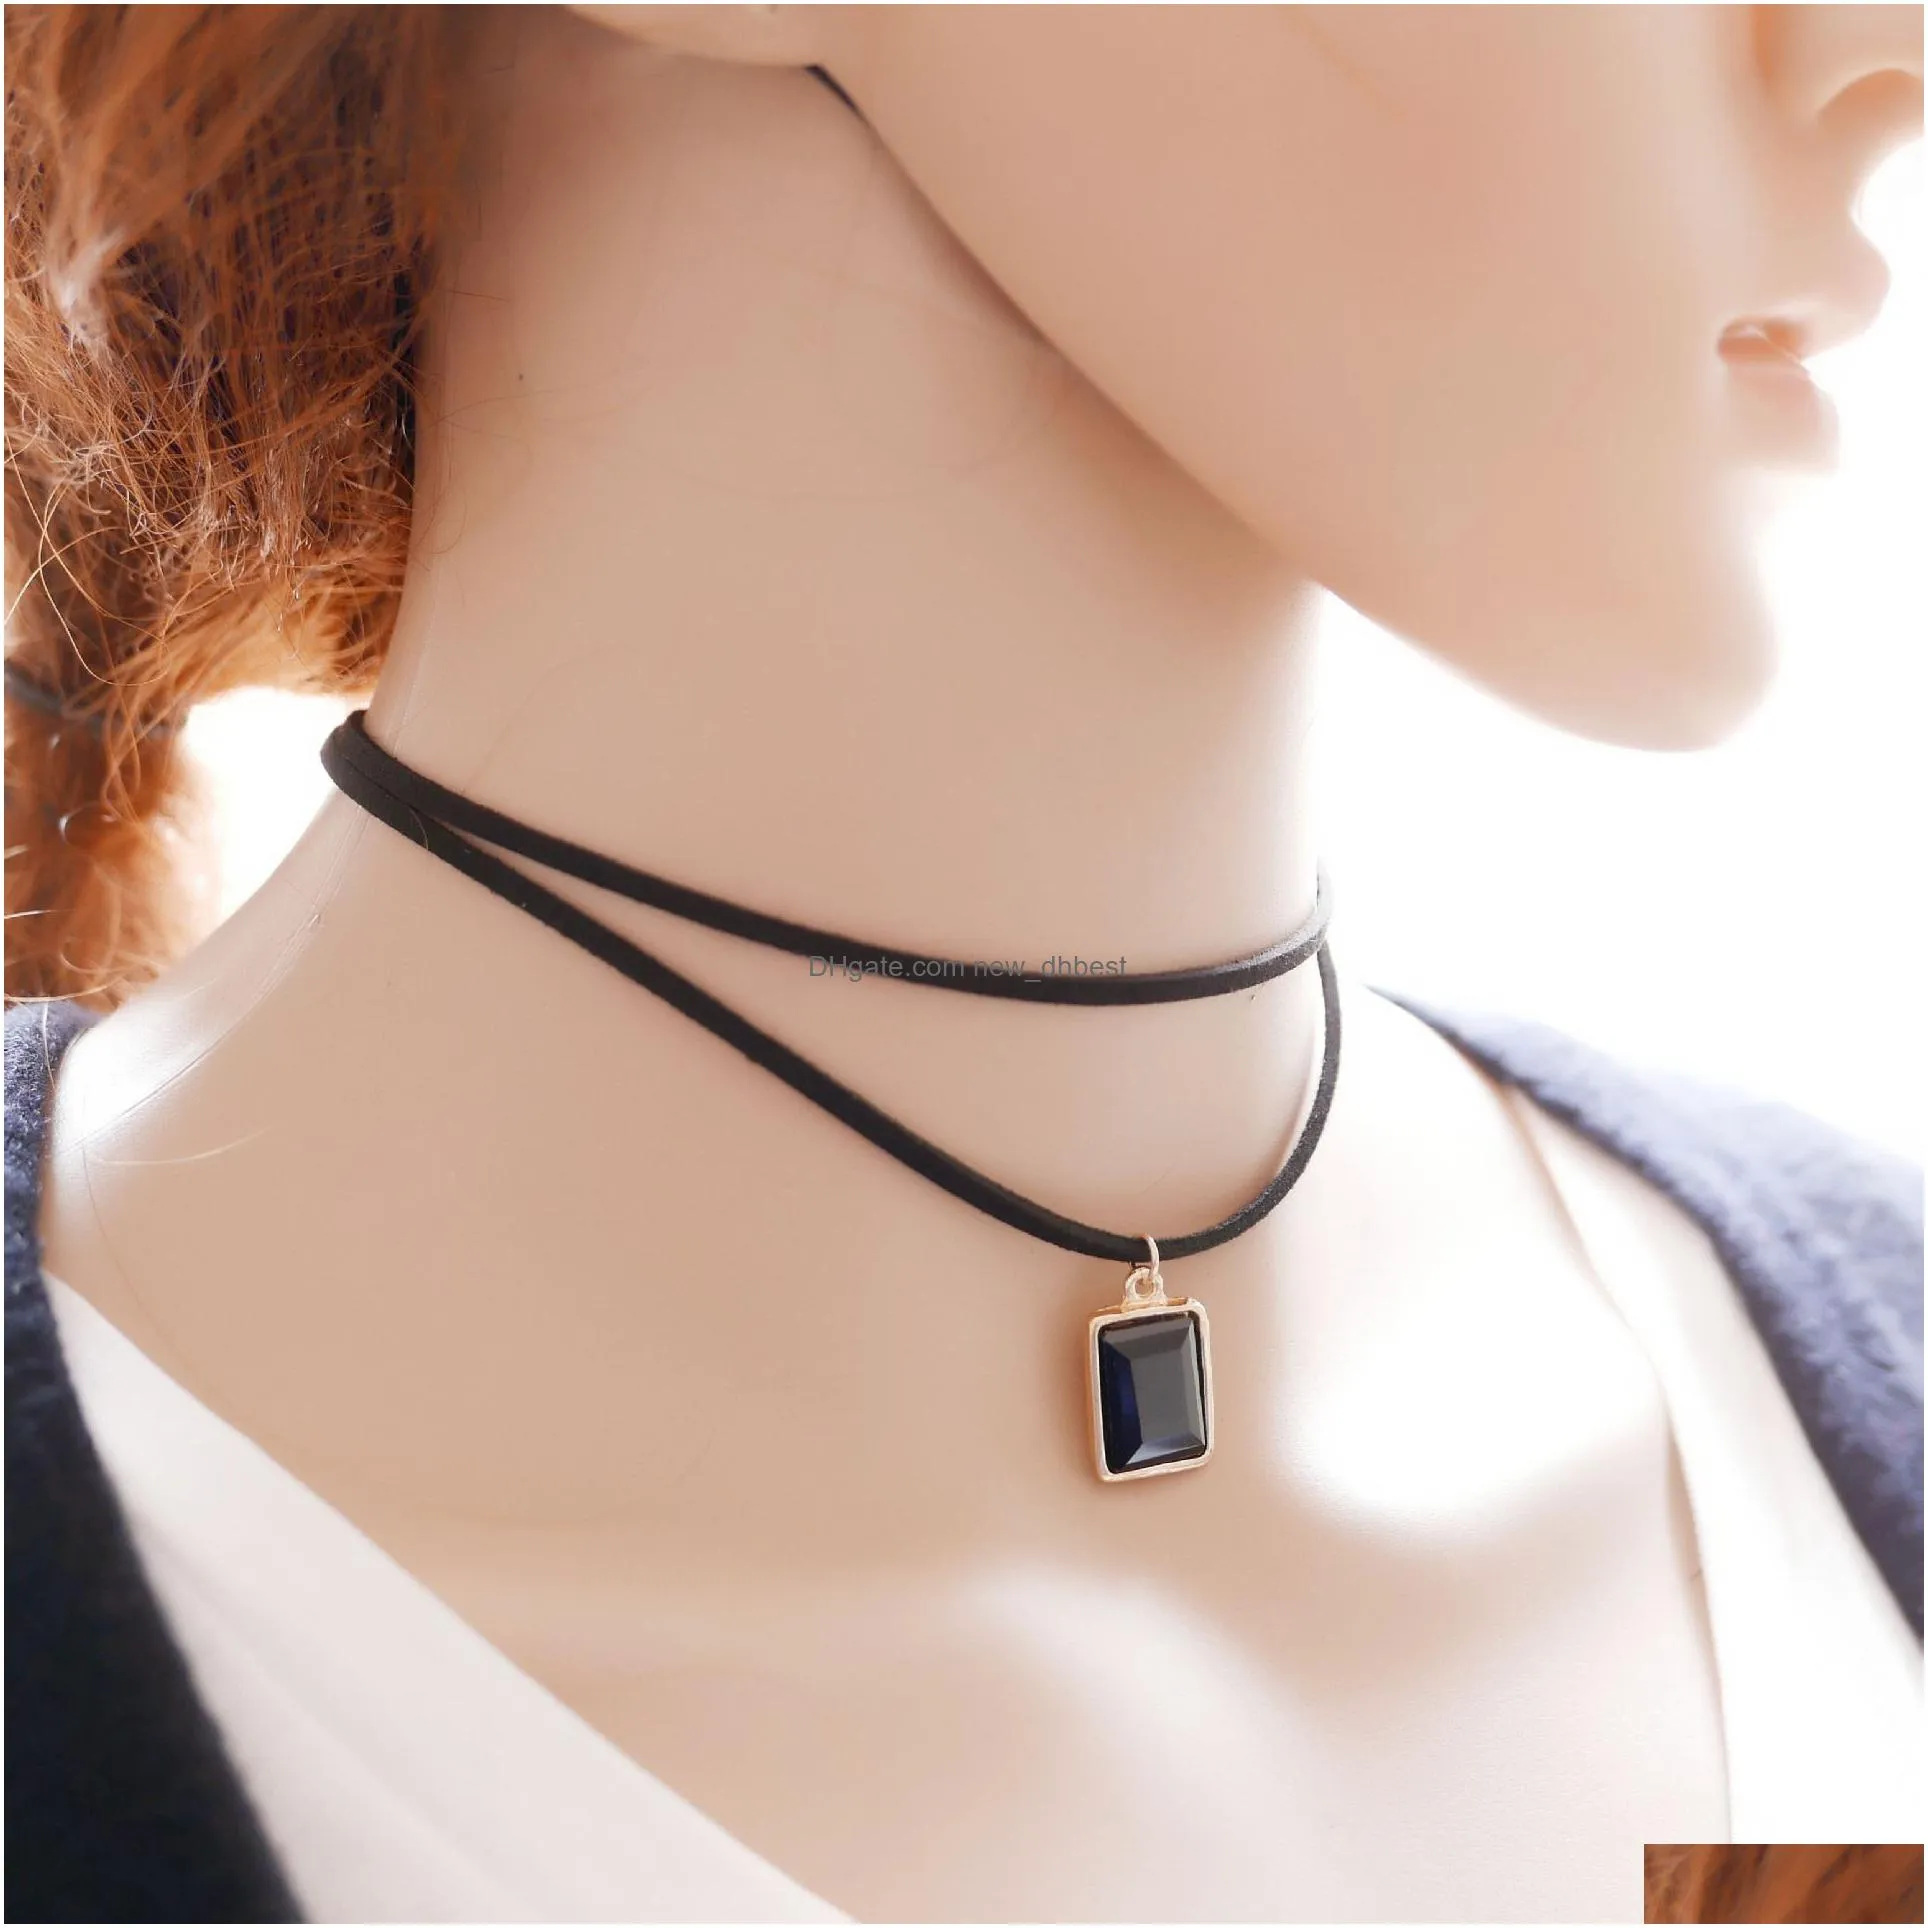 2016 new multilayer black imitation leather choker necklace gothic chain charm gem pendant vintage for women fashion jewelry